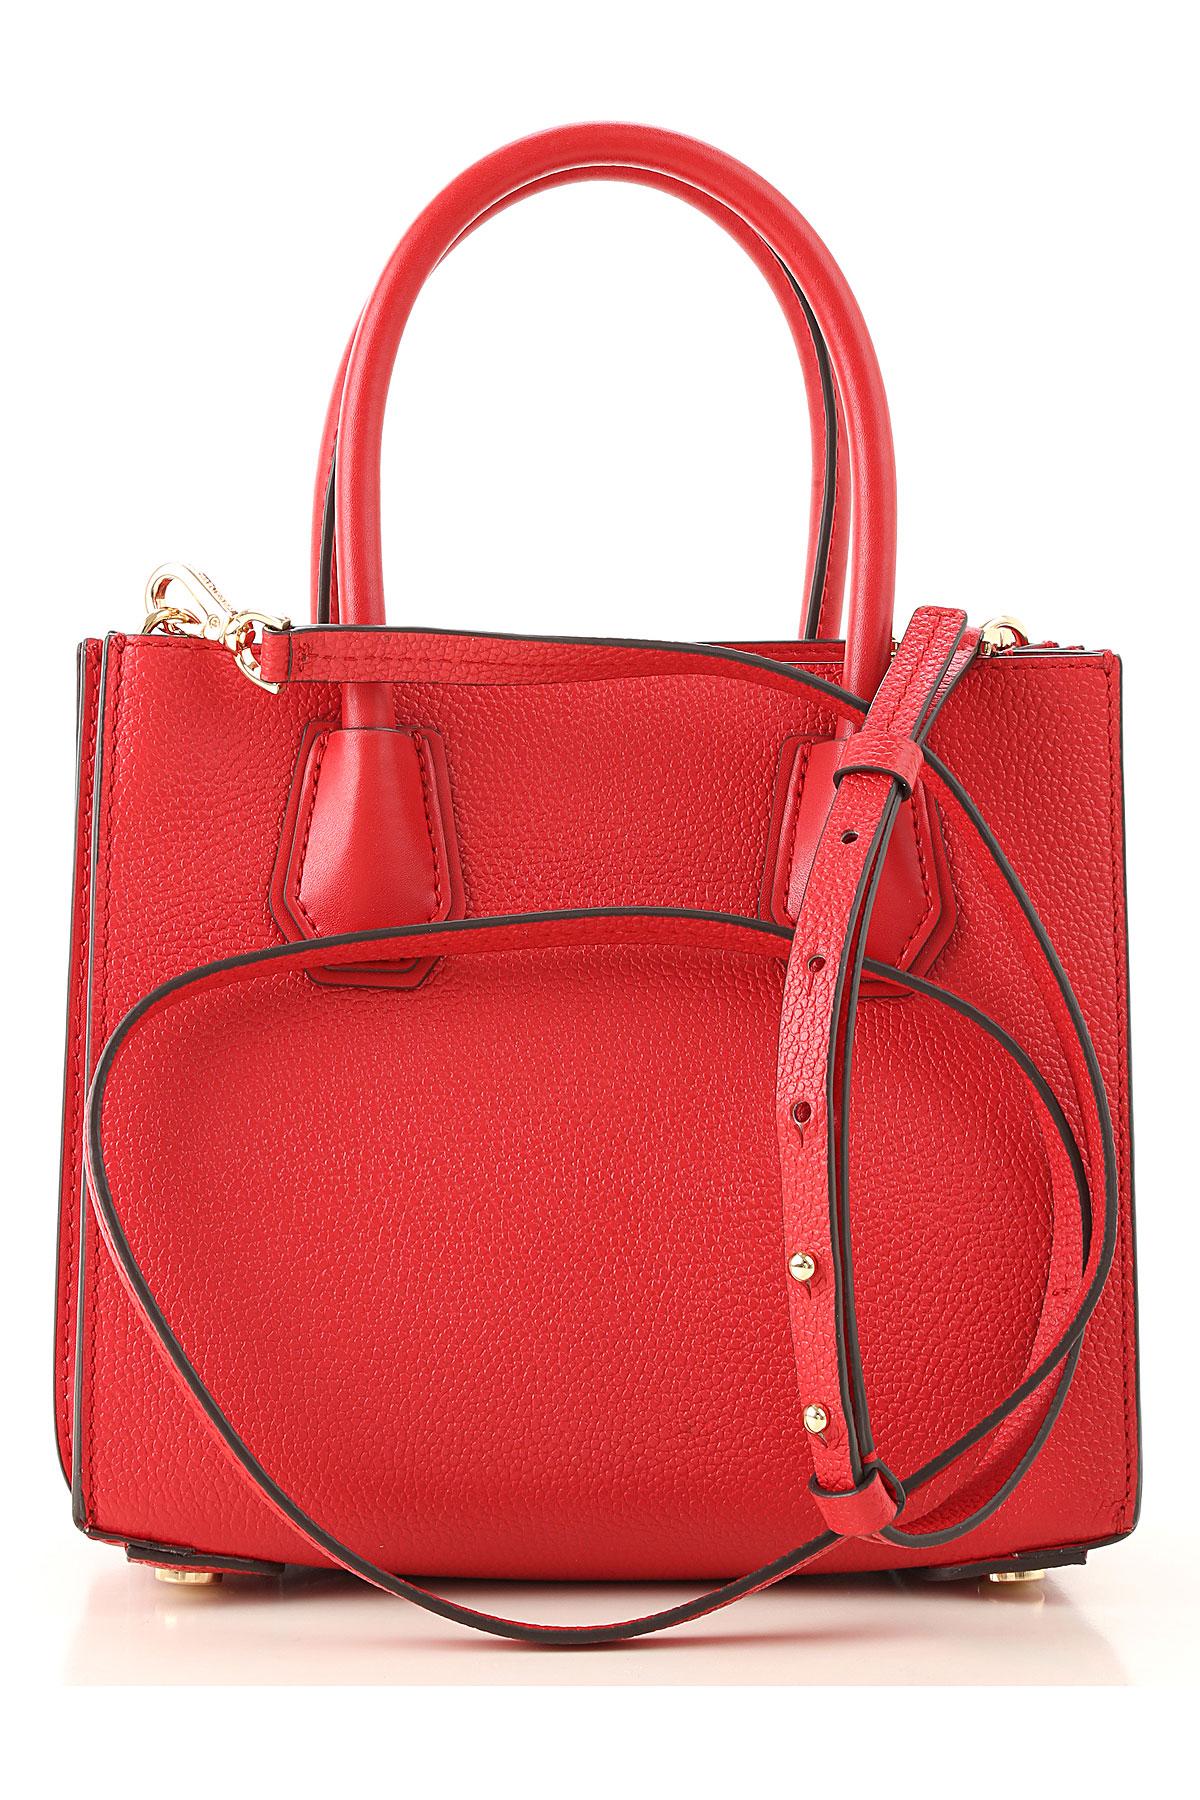 Michael Kors Leather Top Handle Handbag in Bright Red (Red) - Lyst